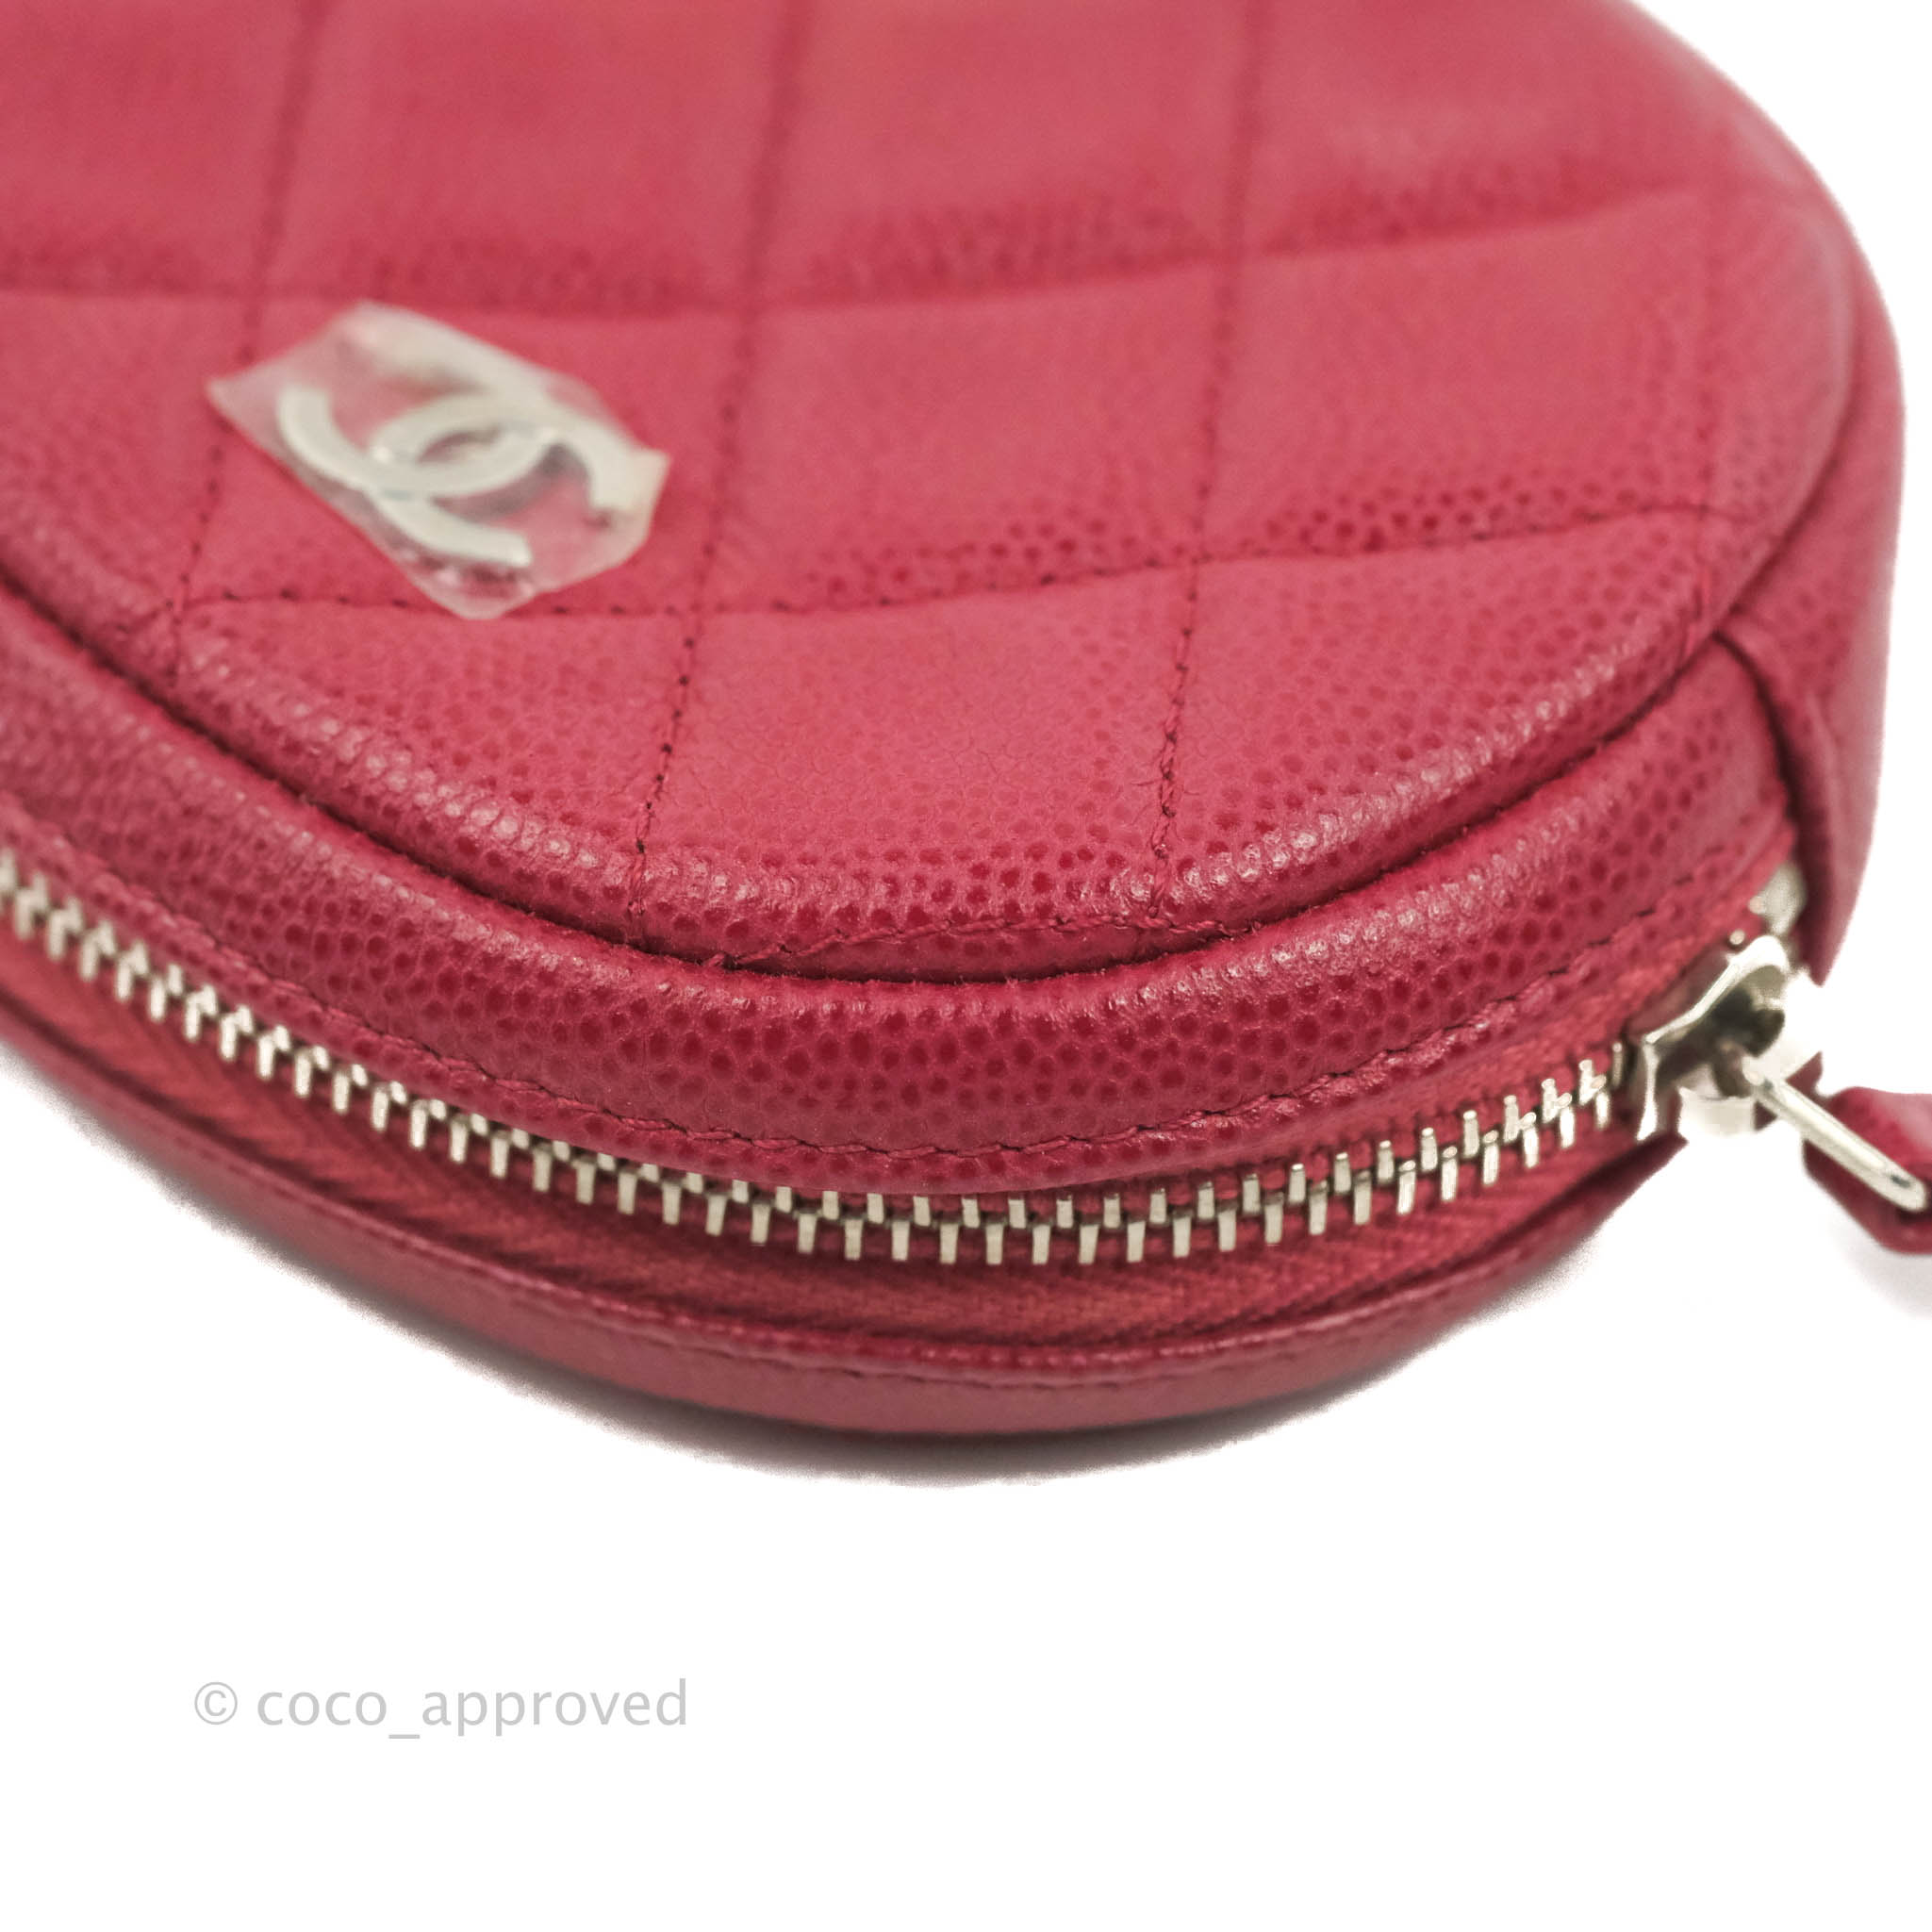 Chanel Red Round Coin Purse – Coco Approved Studio